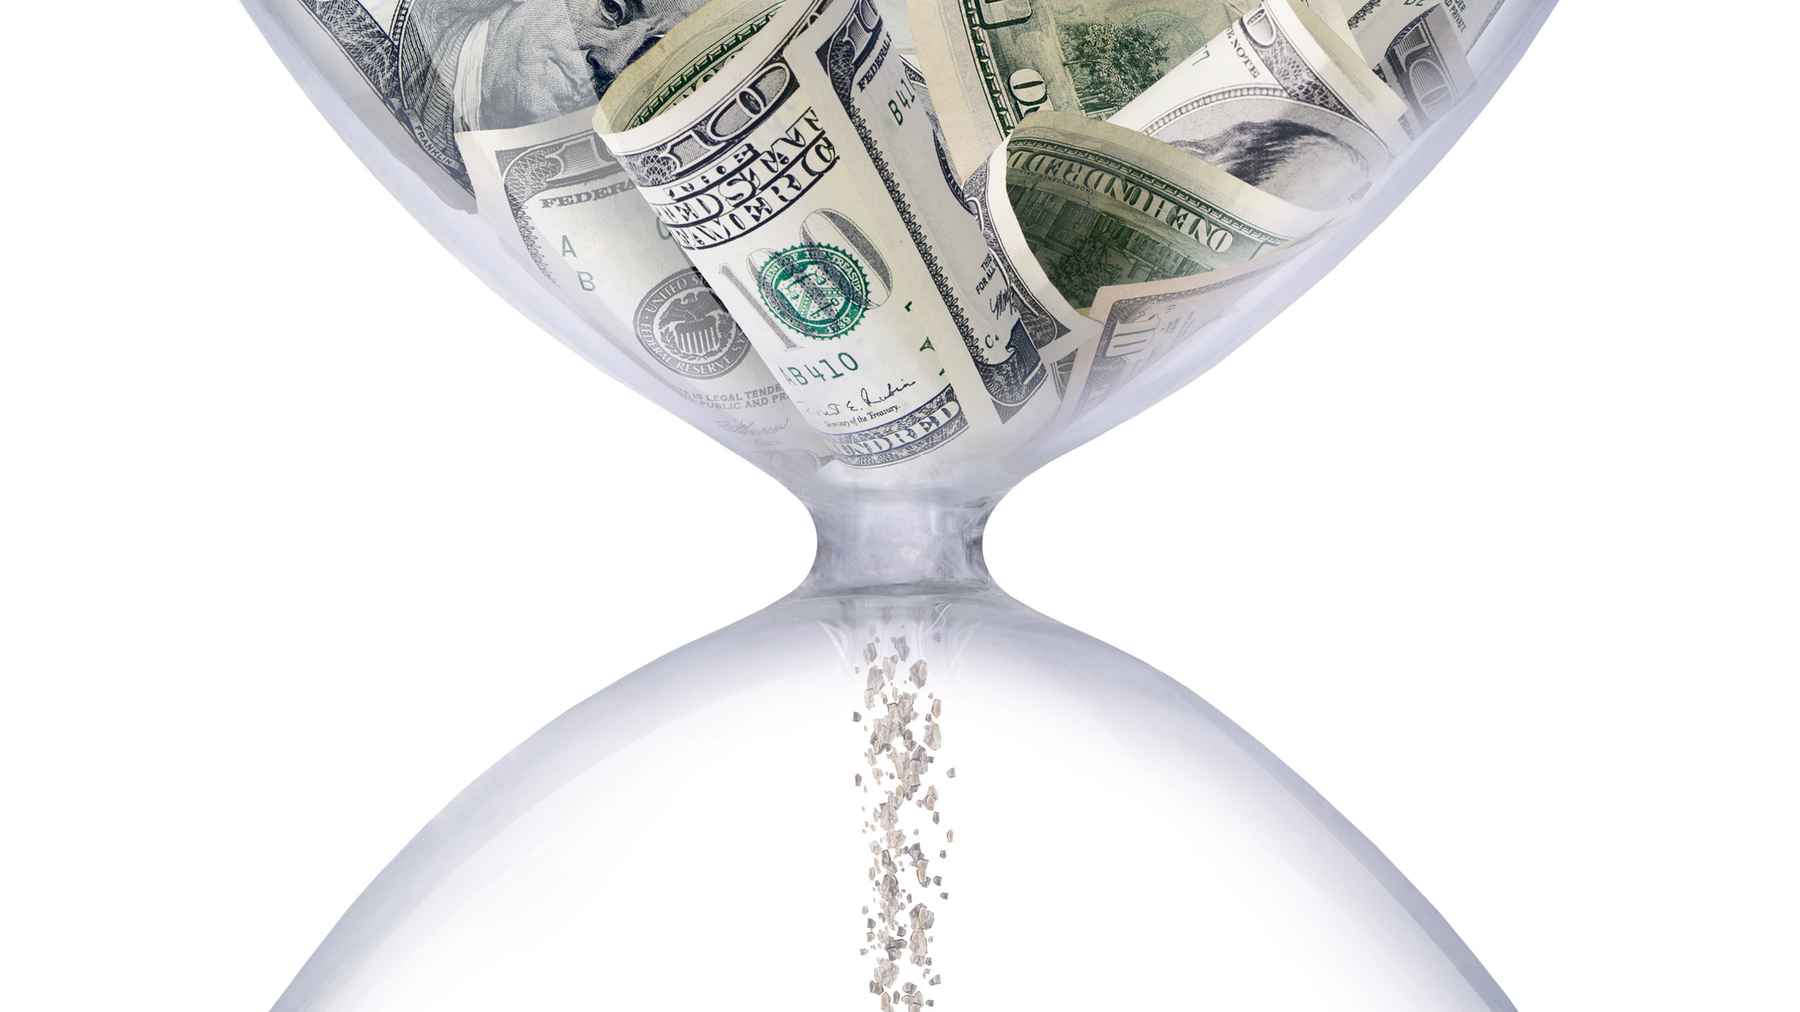 Hourglass with money in hourglass instead of sand. Time equals money.